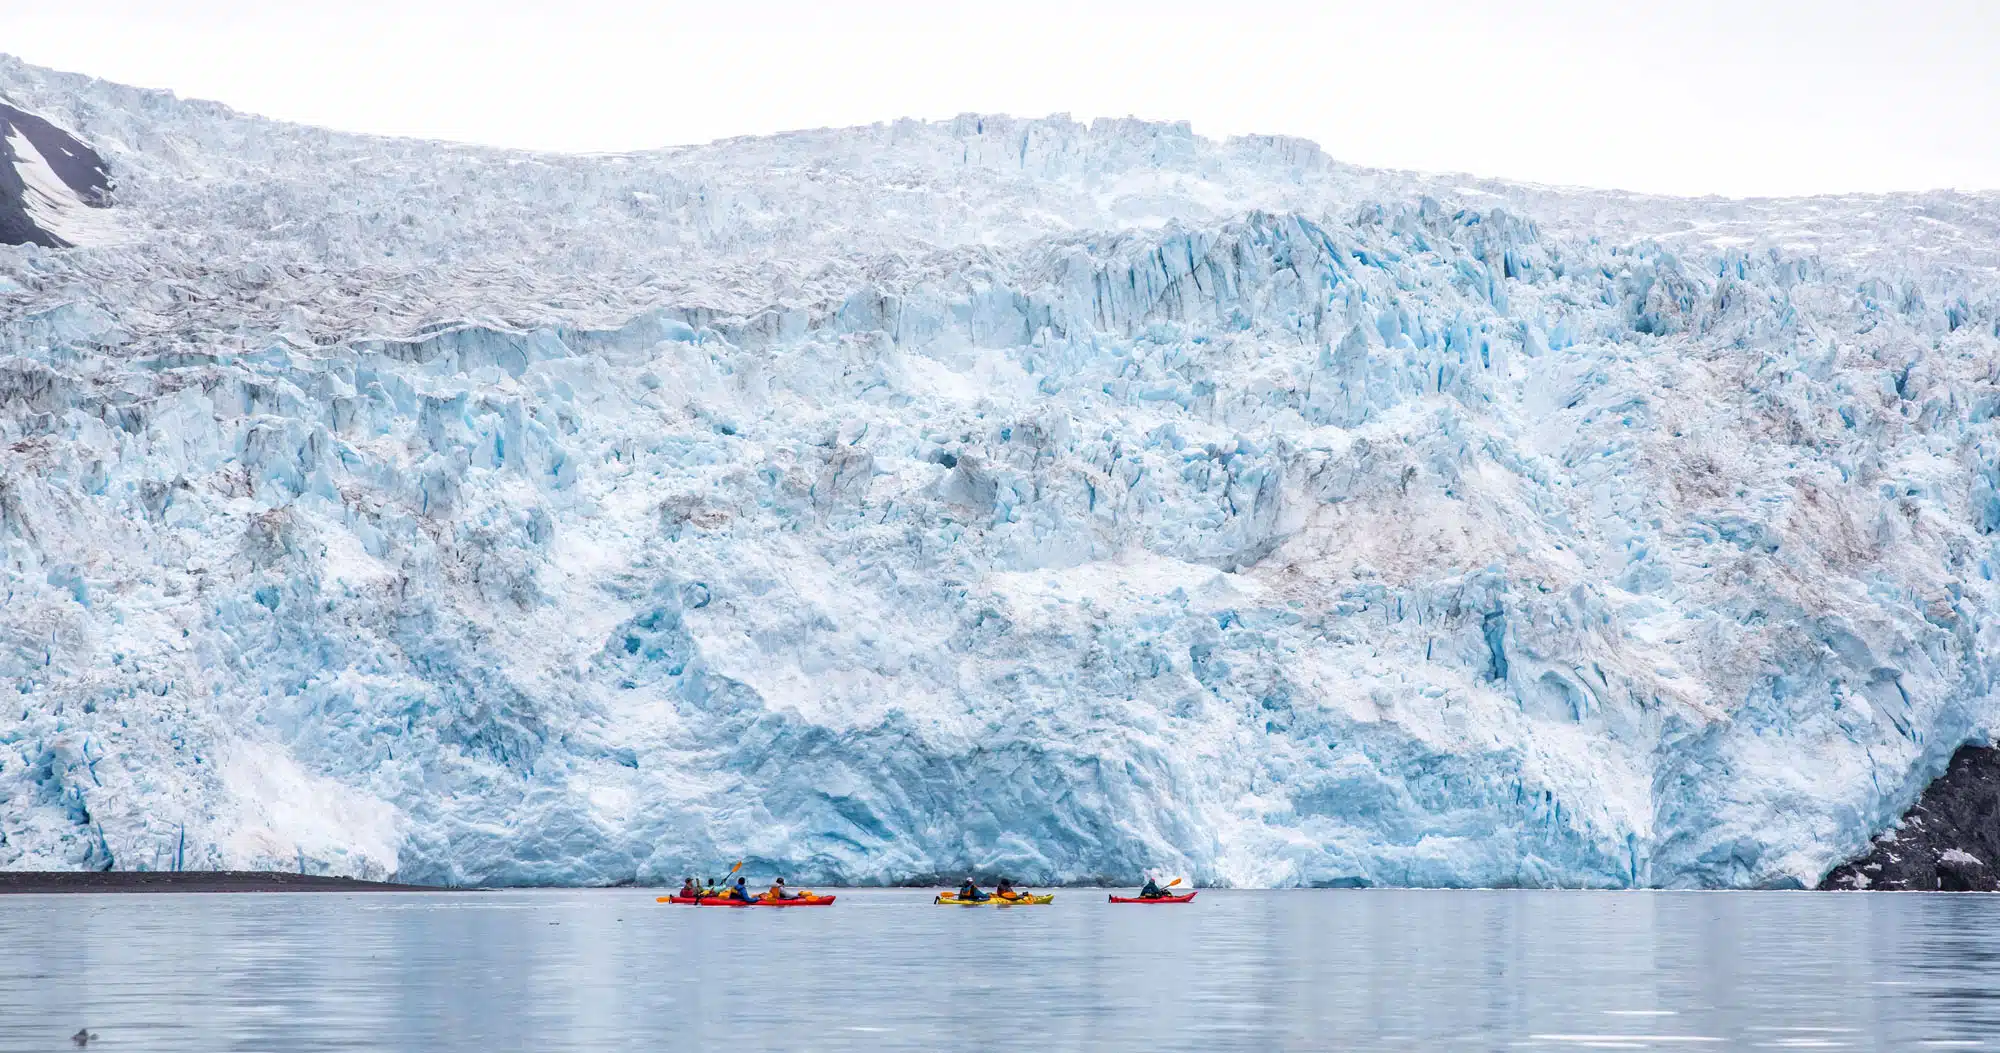 Featured image for “Aialik Glacier Kayaking: Beauty & Adventure in Kenai Fjords”